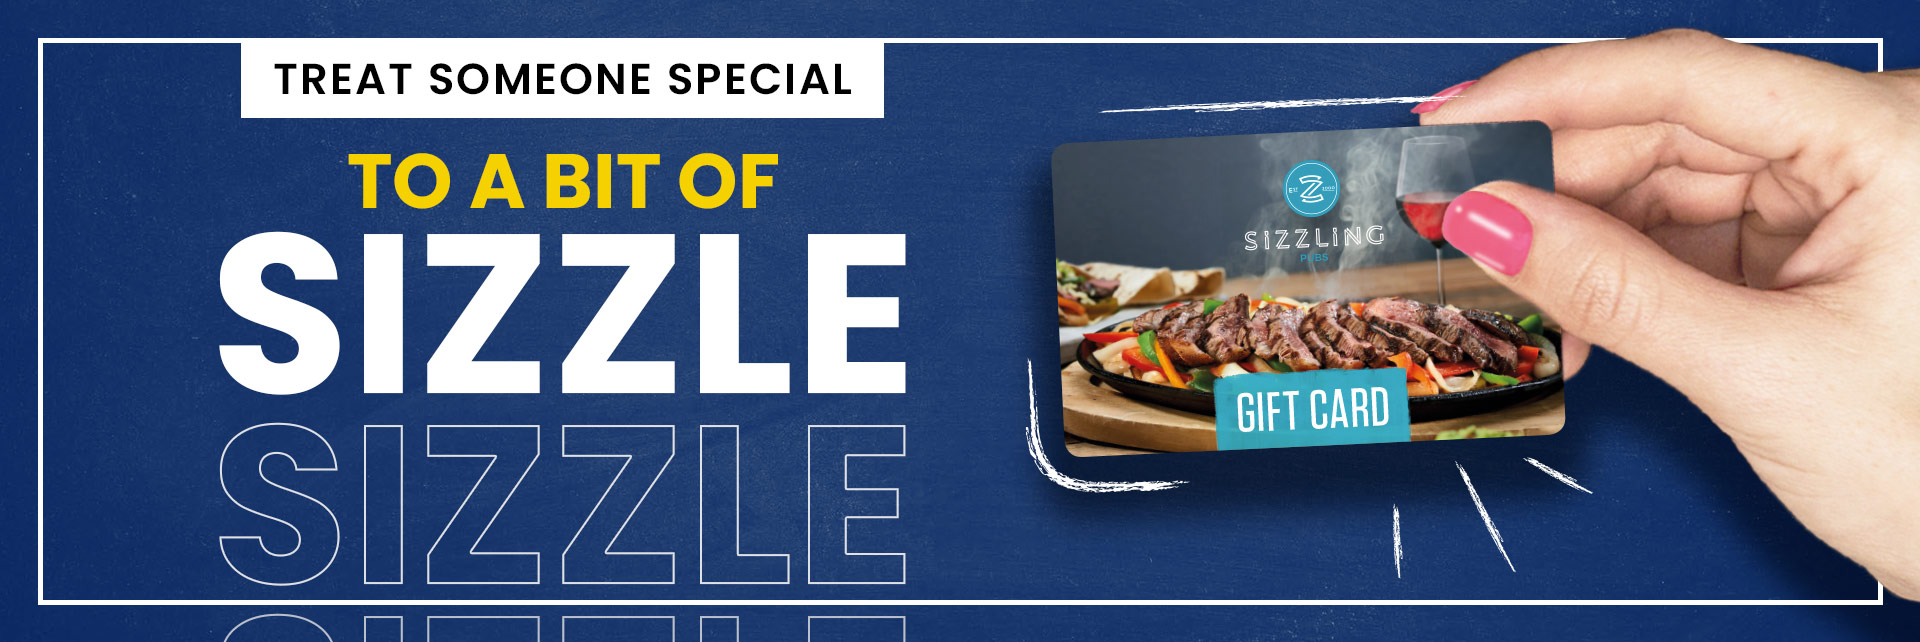 Sizzling Pubs Gift Card at The Grove Inn in Newark